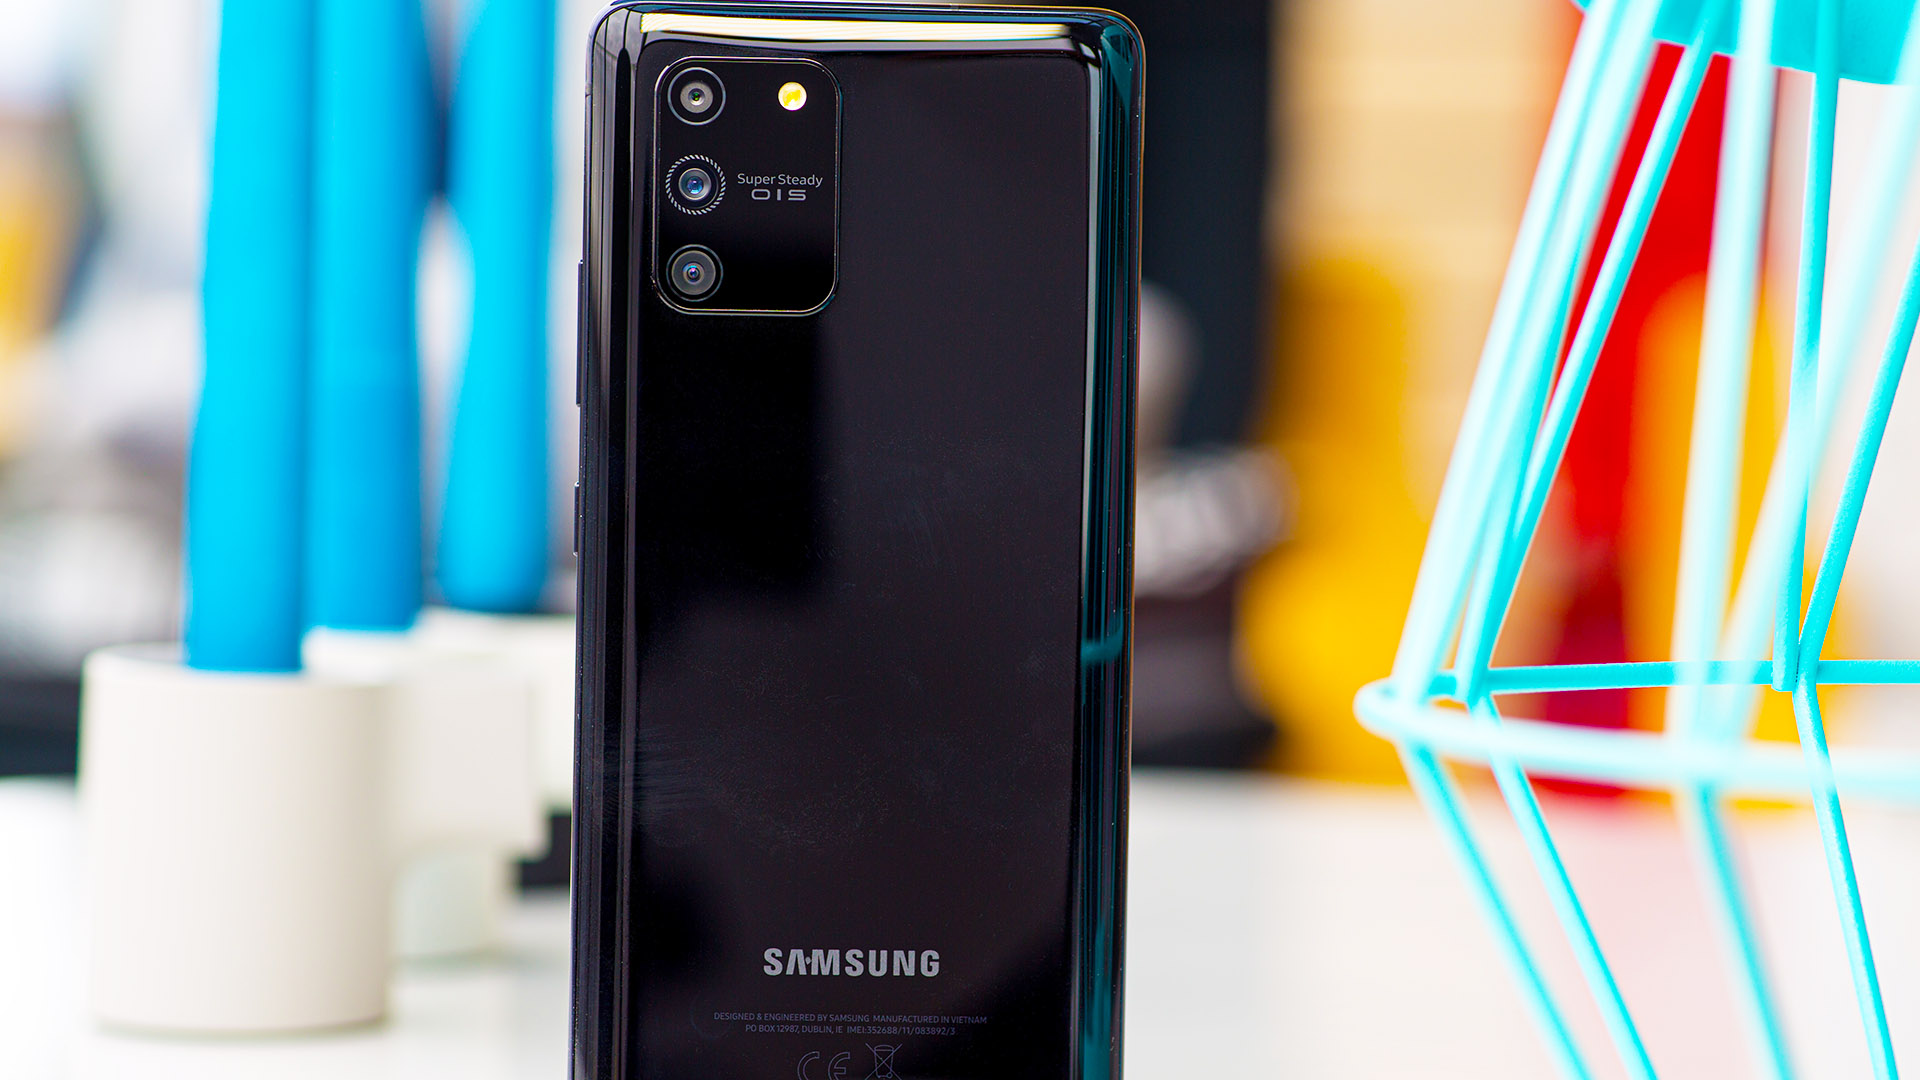 Samsung Galaxy S10 Lite Review, Specs and Price in Bangladesh